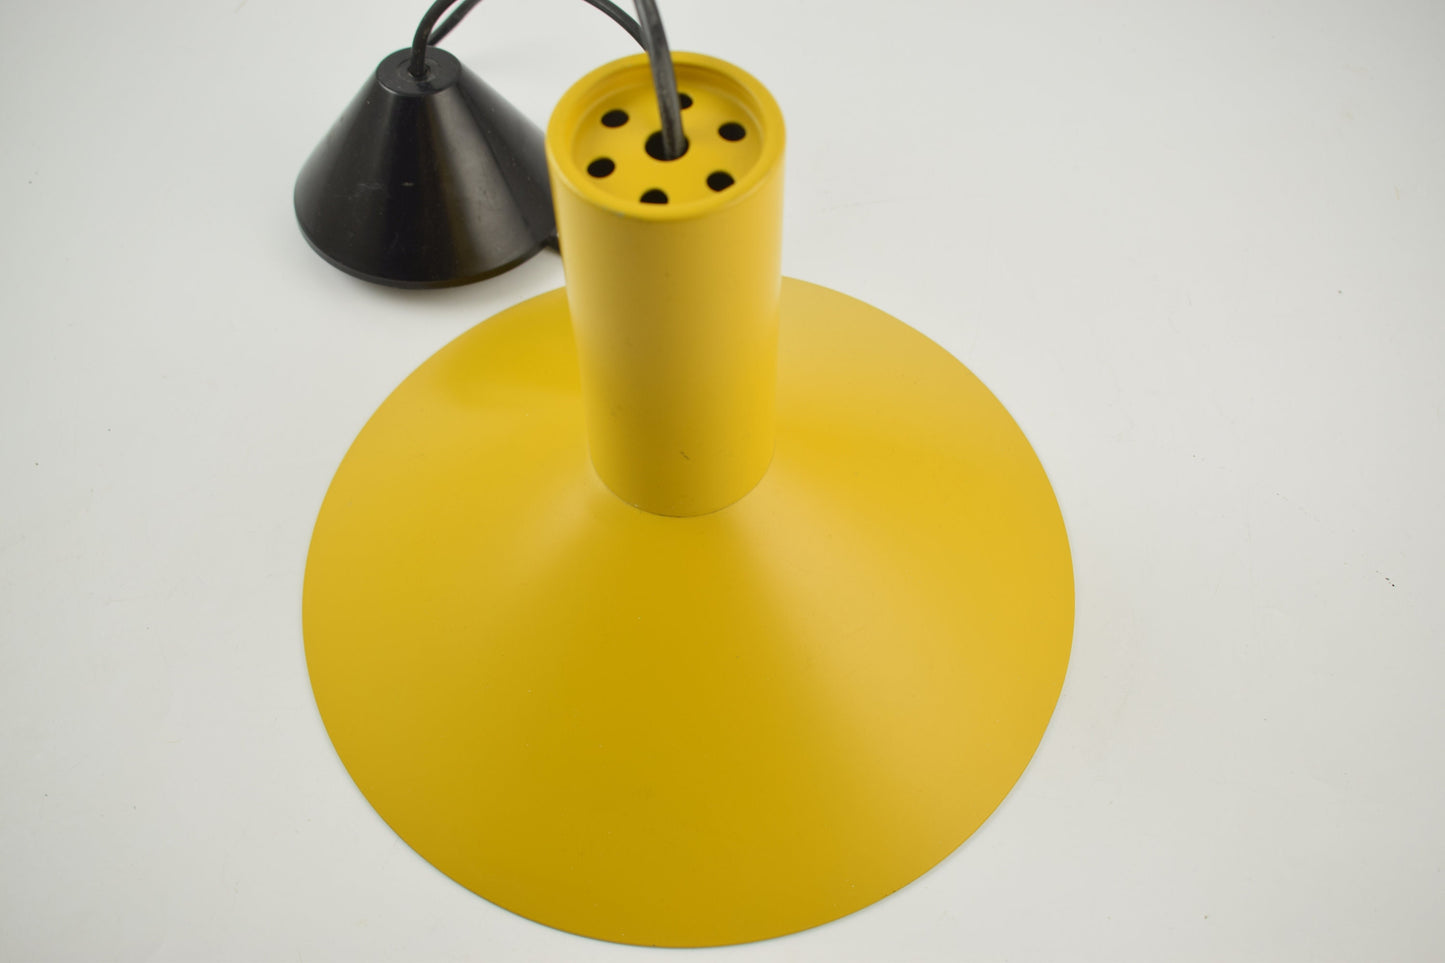 Fog and Morup Formel 1 yellow pendant lamp designed by Hans Due, Denmark 1975.